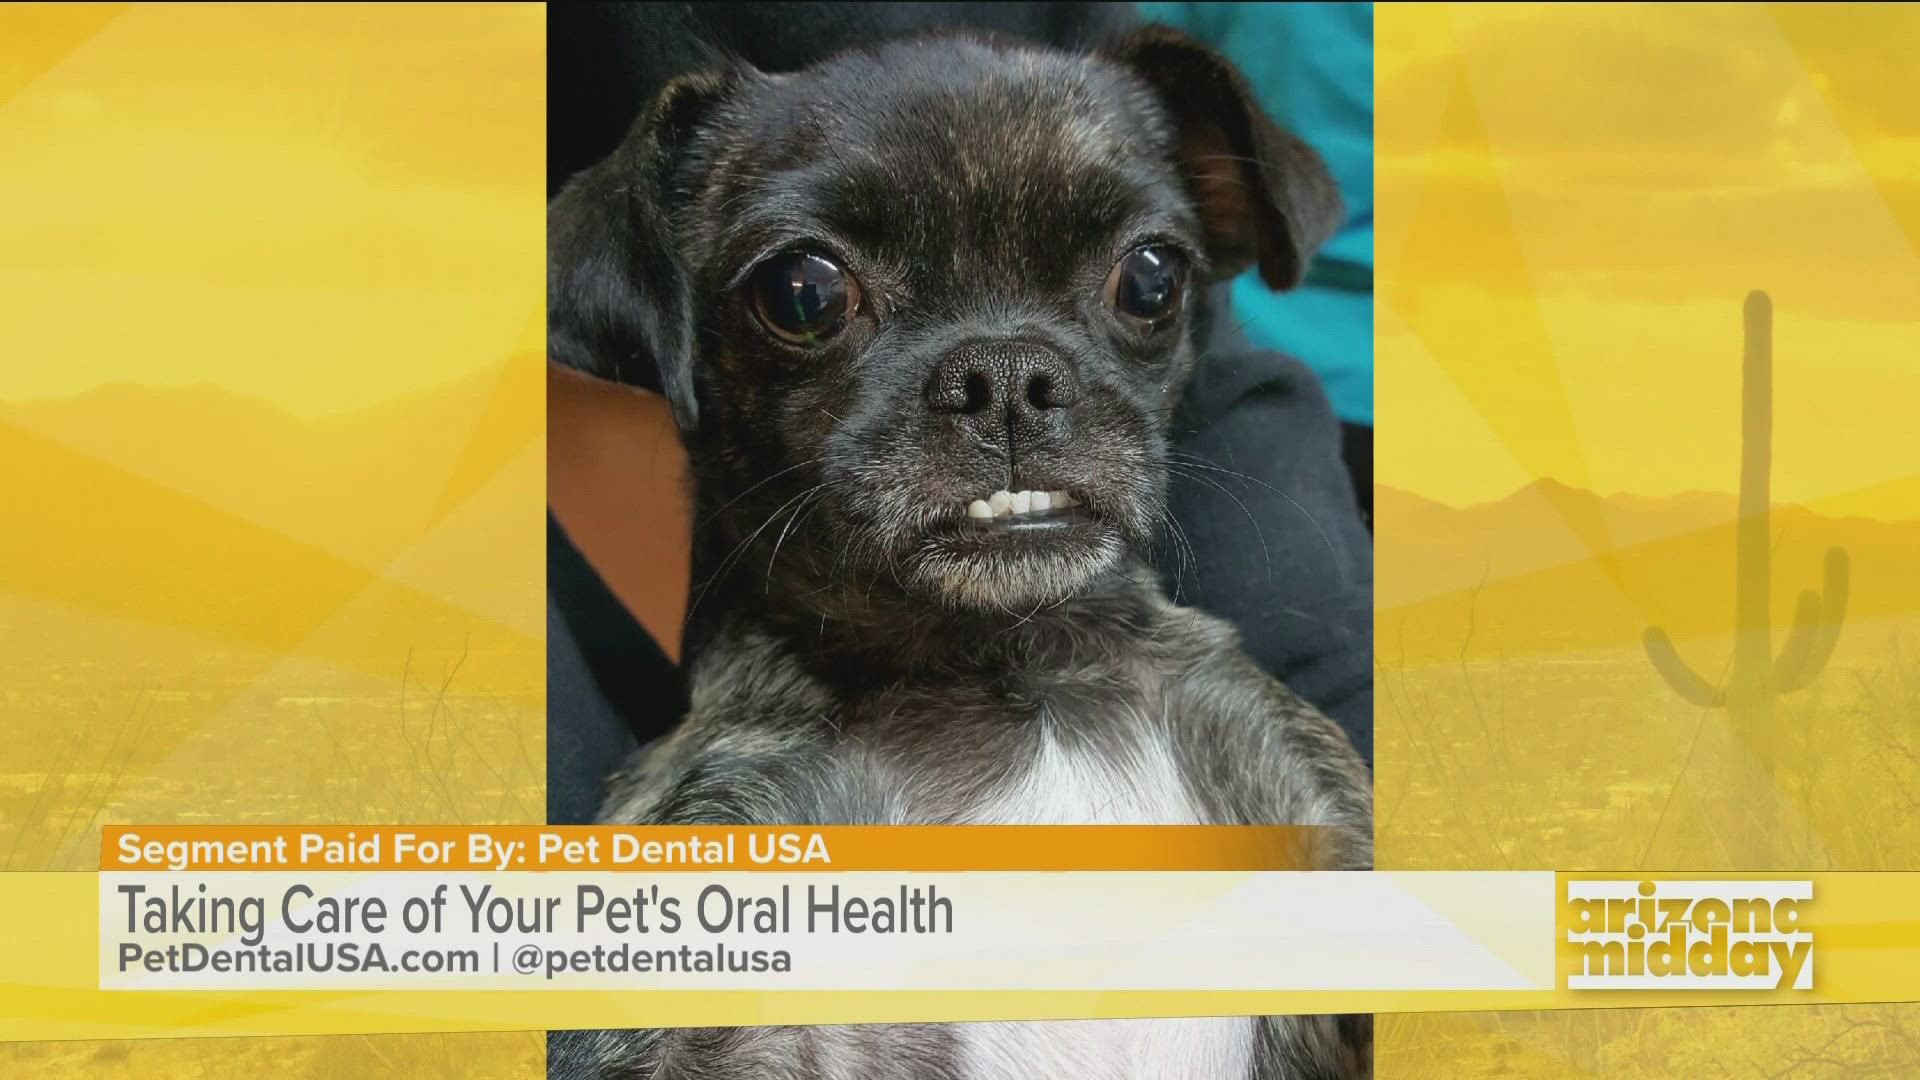 Doctors Jennifer Redmon and Kerry Mead from Pet Dental USA say problems from poor pet dental health are oftentimes caused by products on pet store shelves.